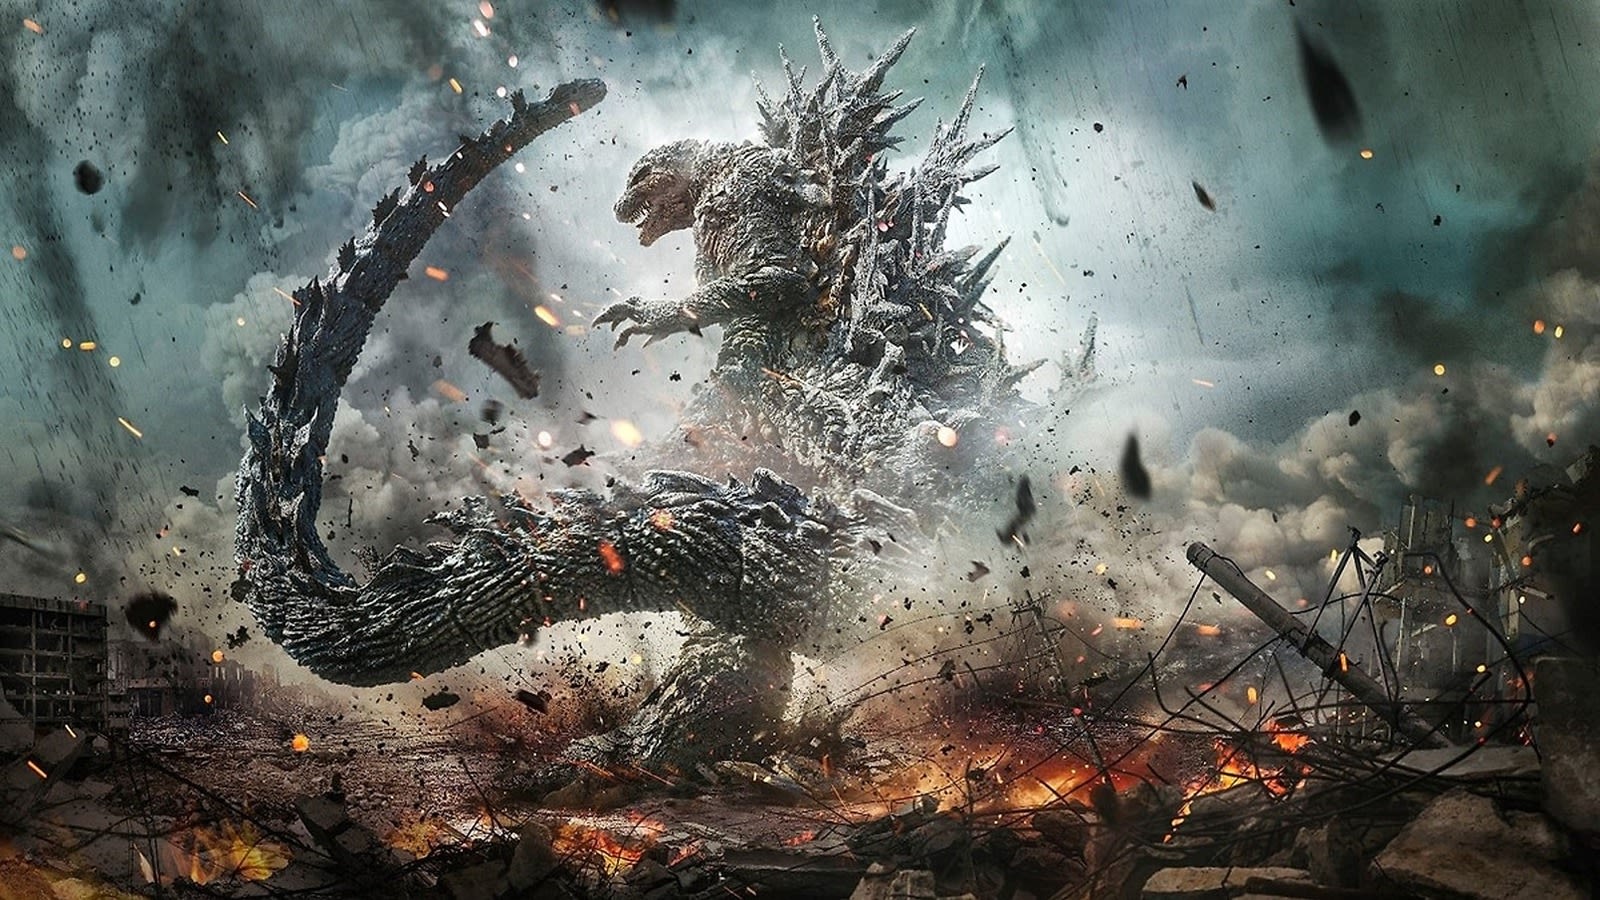 Godzilla Minus One Is Getting An Incredible Blu-Ray Release – But There's A Catch - SlashFilm